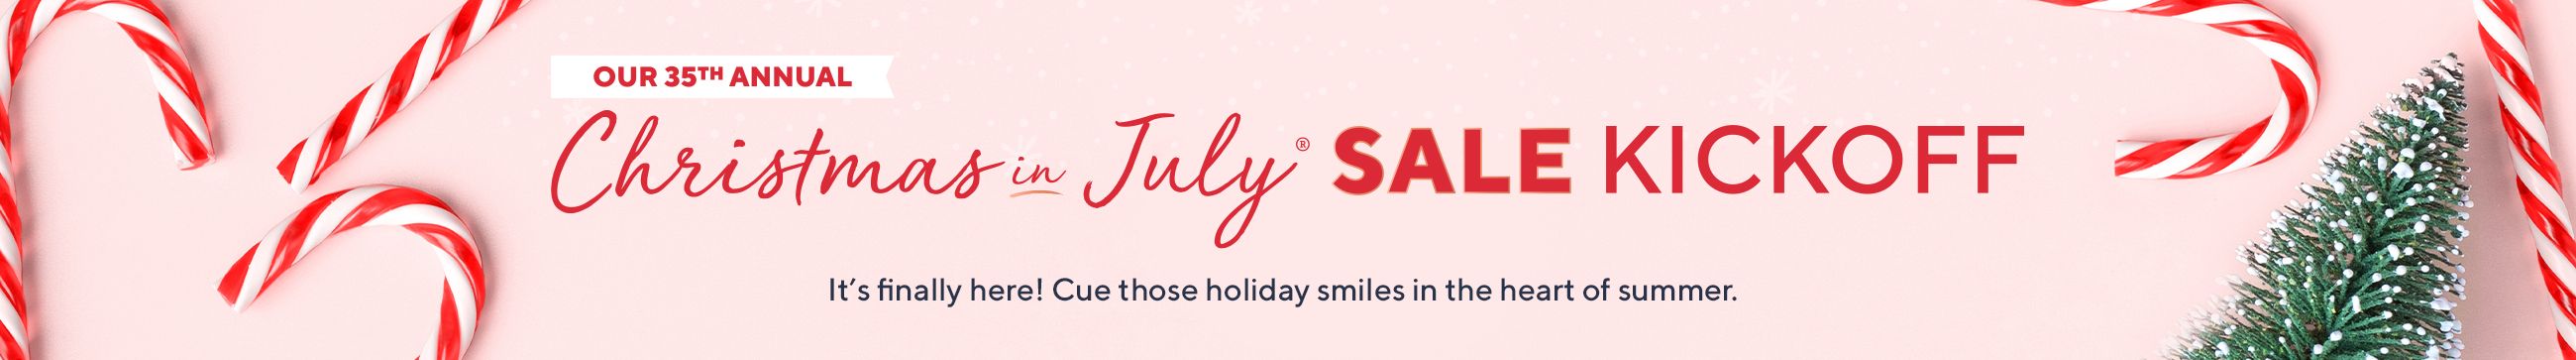 Our 35th Annual Christmas in July® Sale Kickoff - It’s finally here! Cue those holiday smiles in the heart of summer.